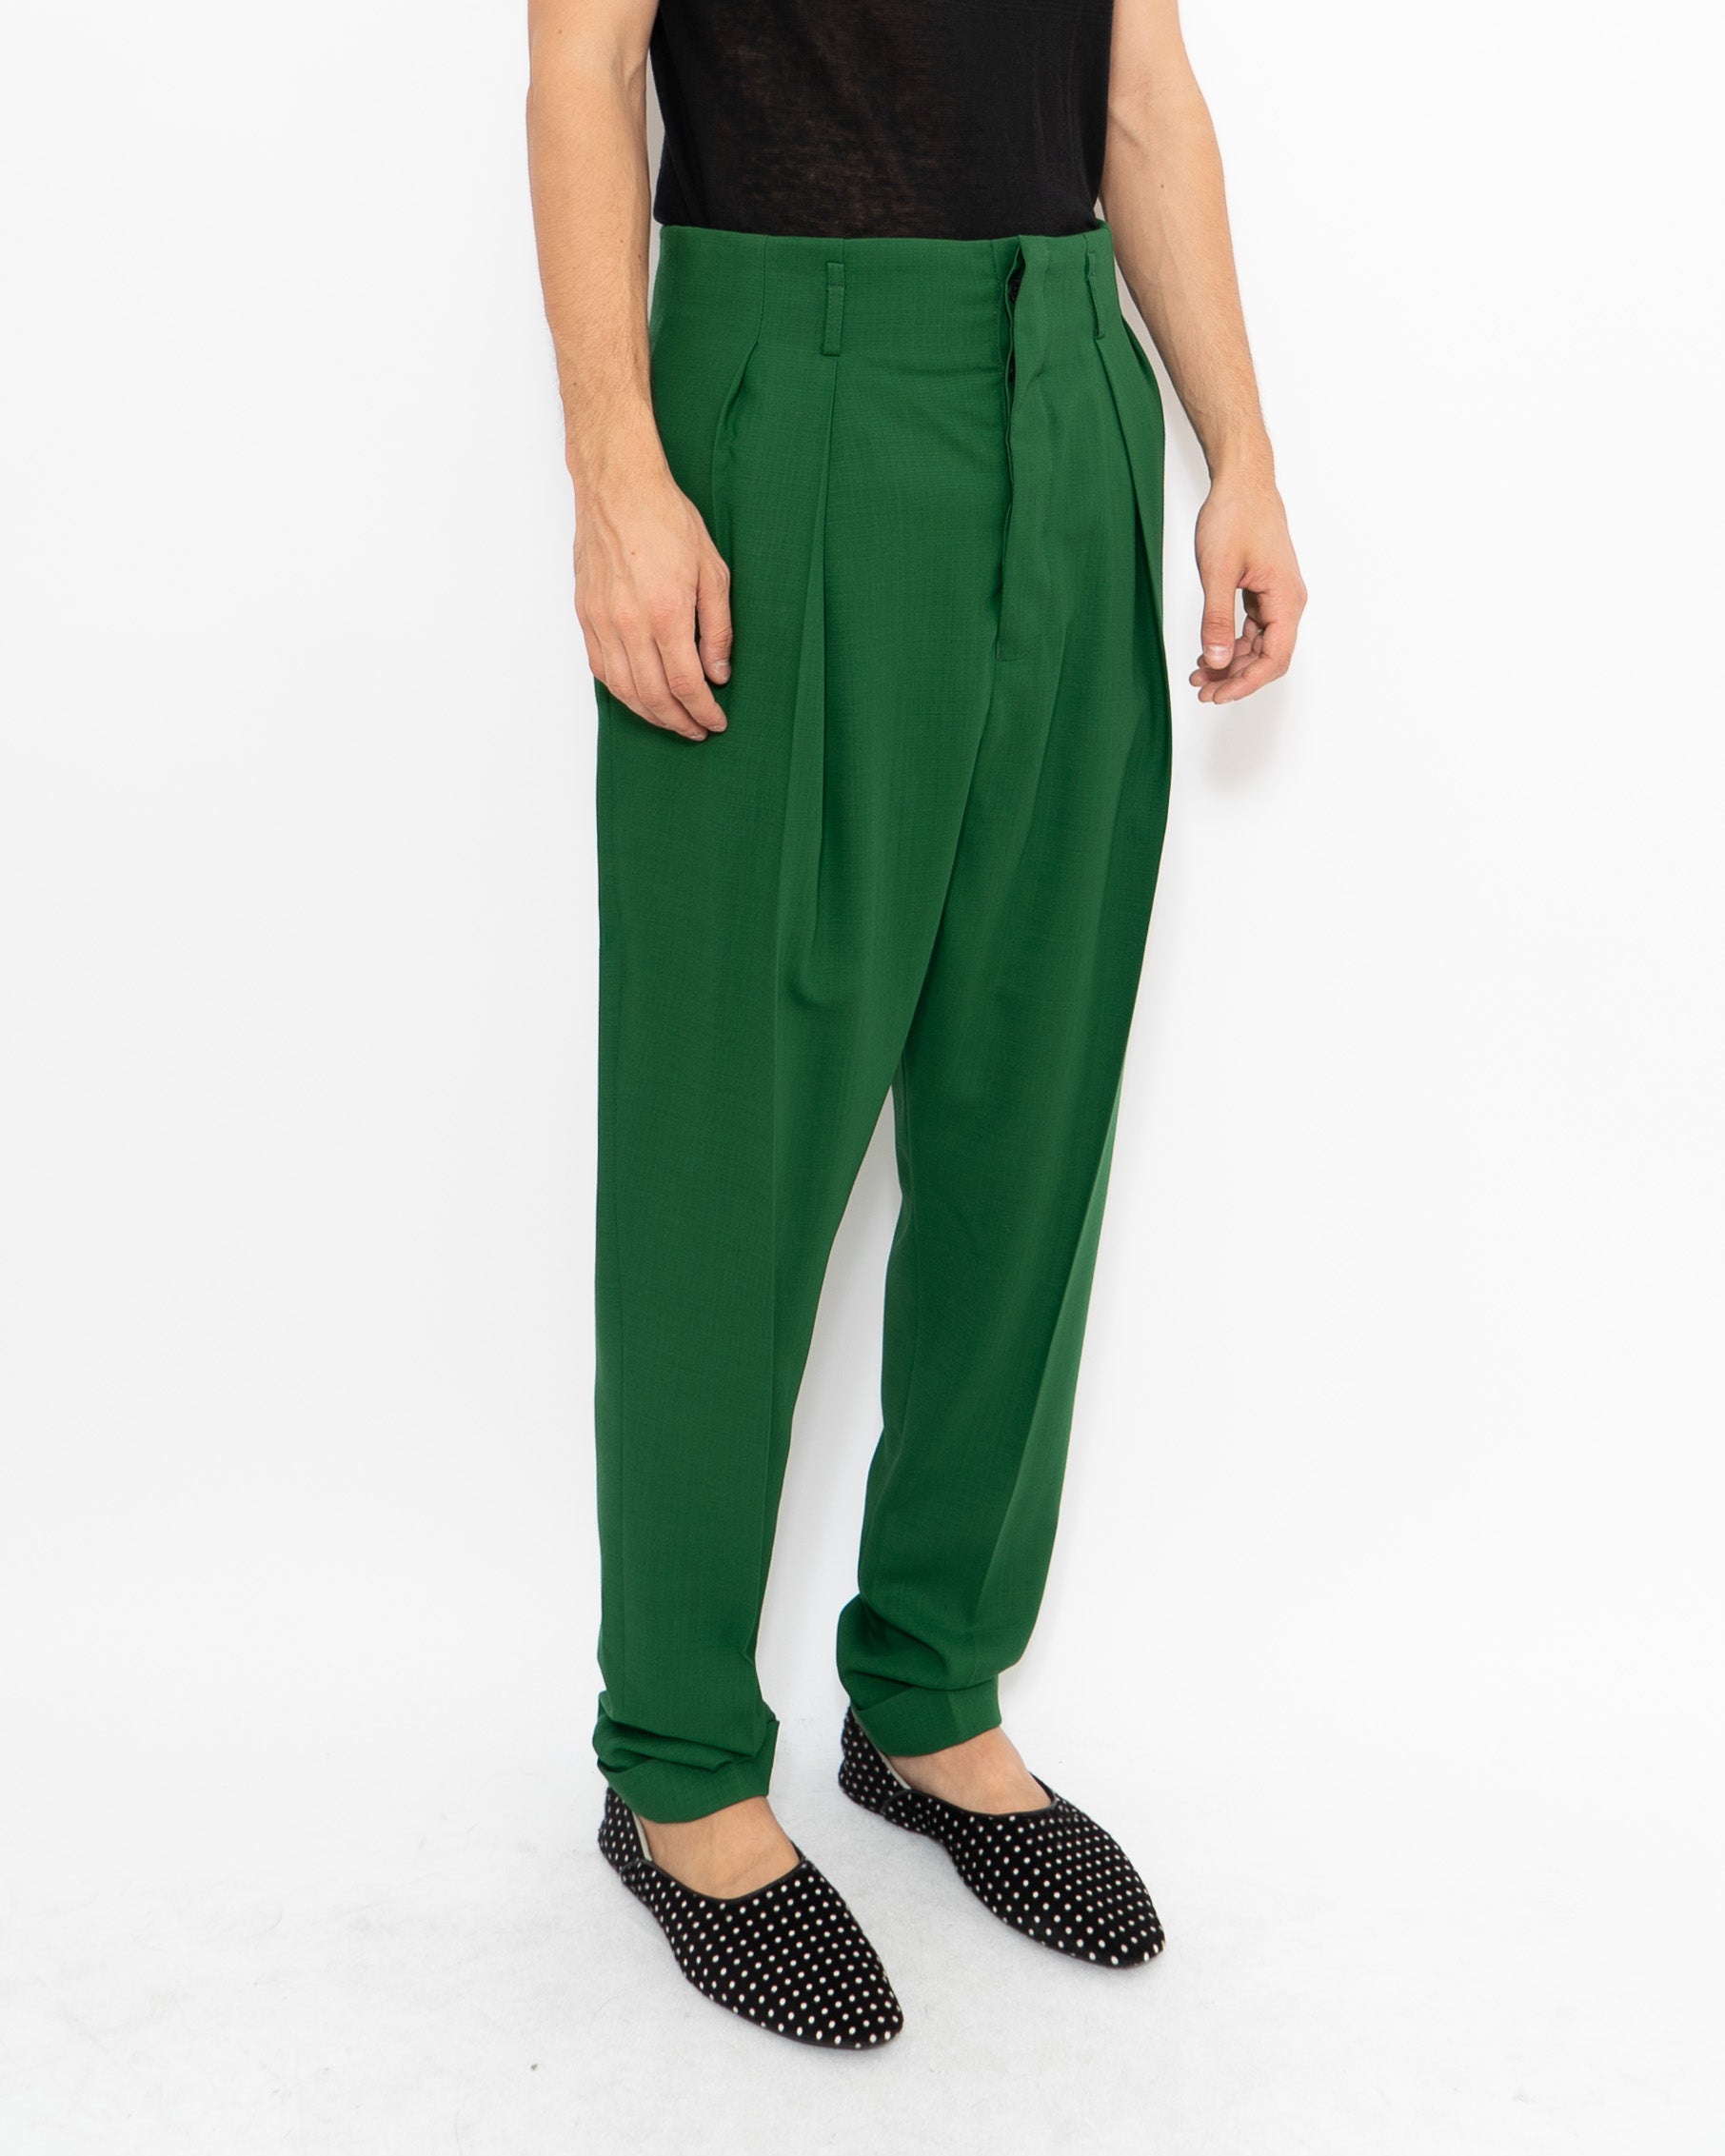 SS19 Pleated Green Wool Trousers Sample